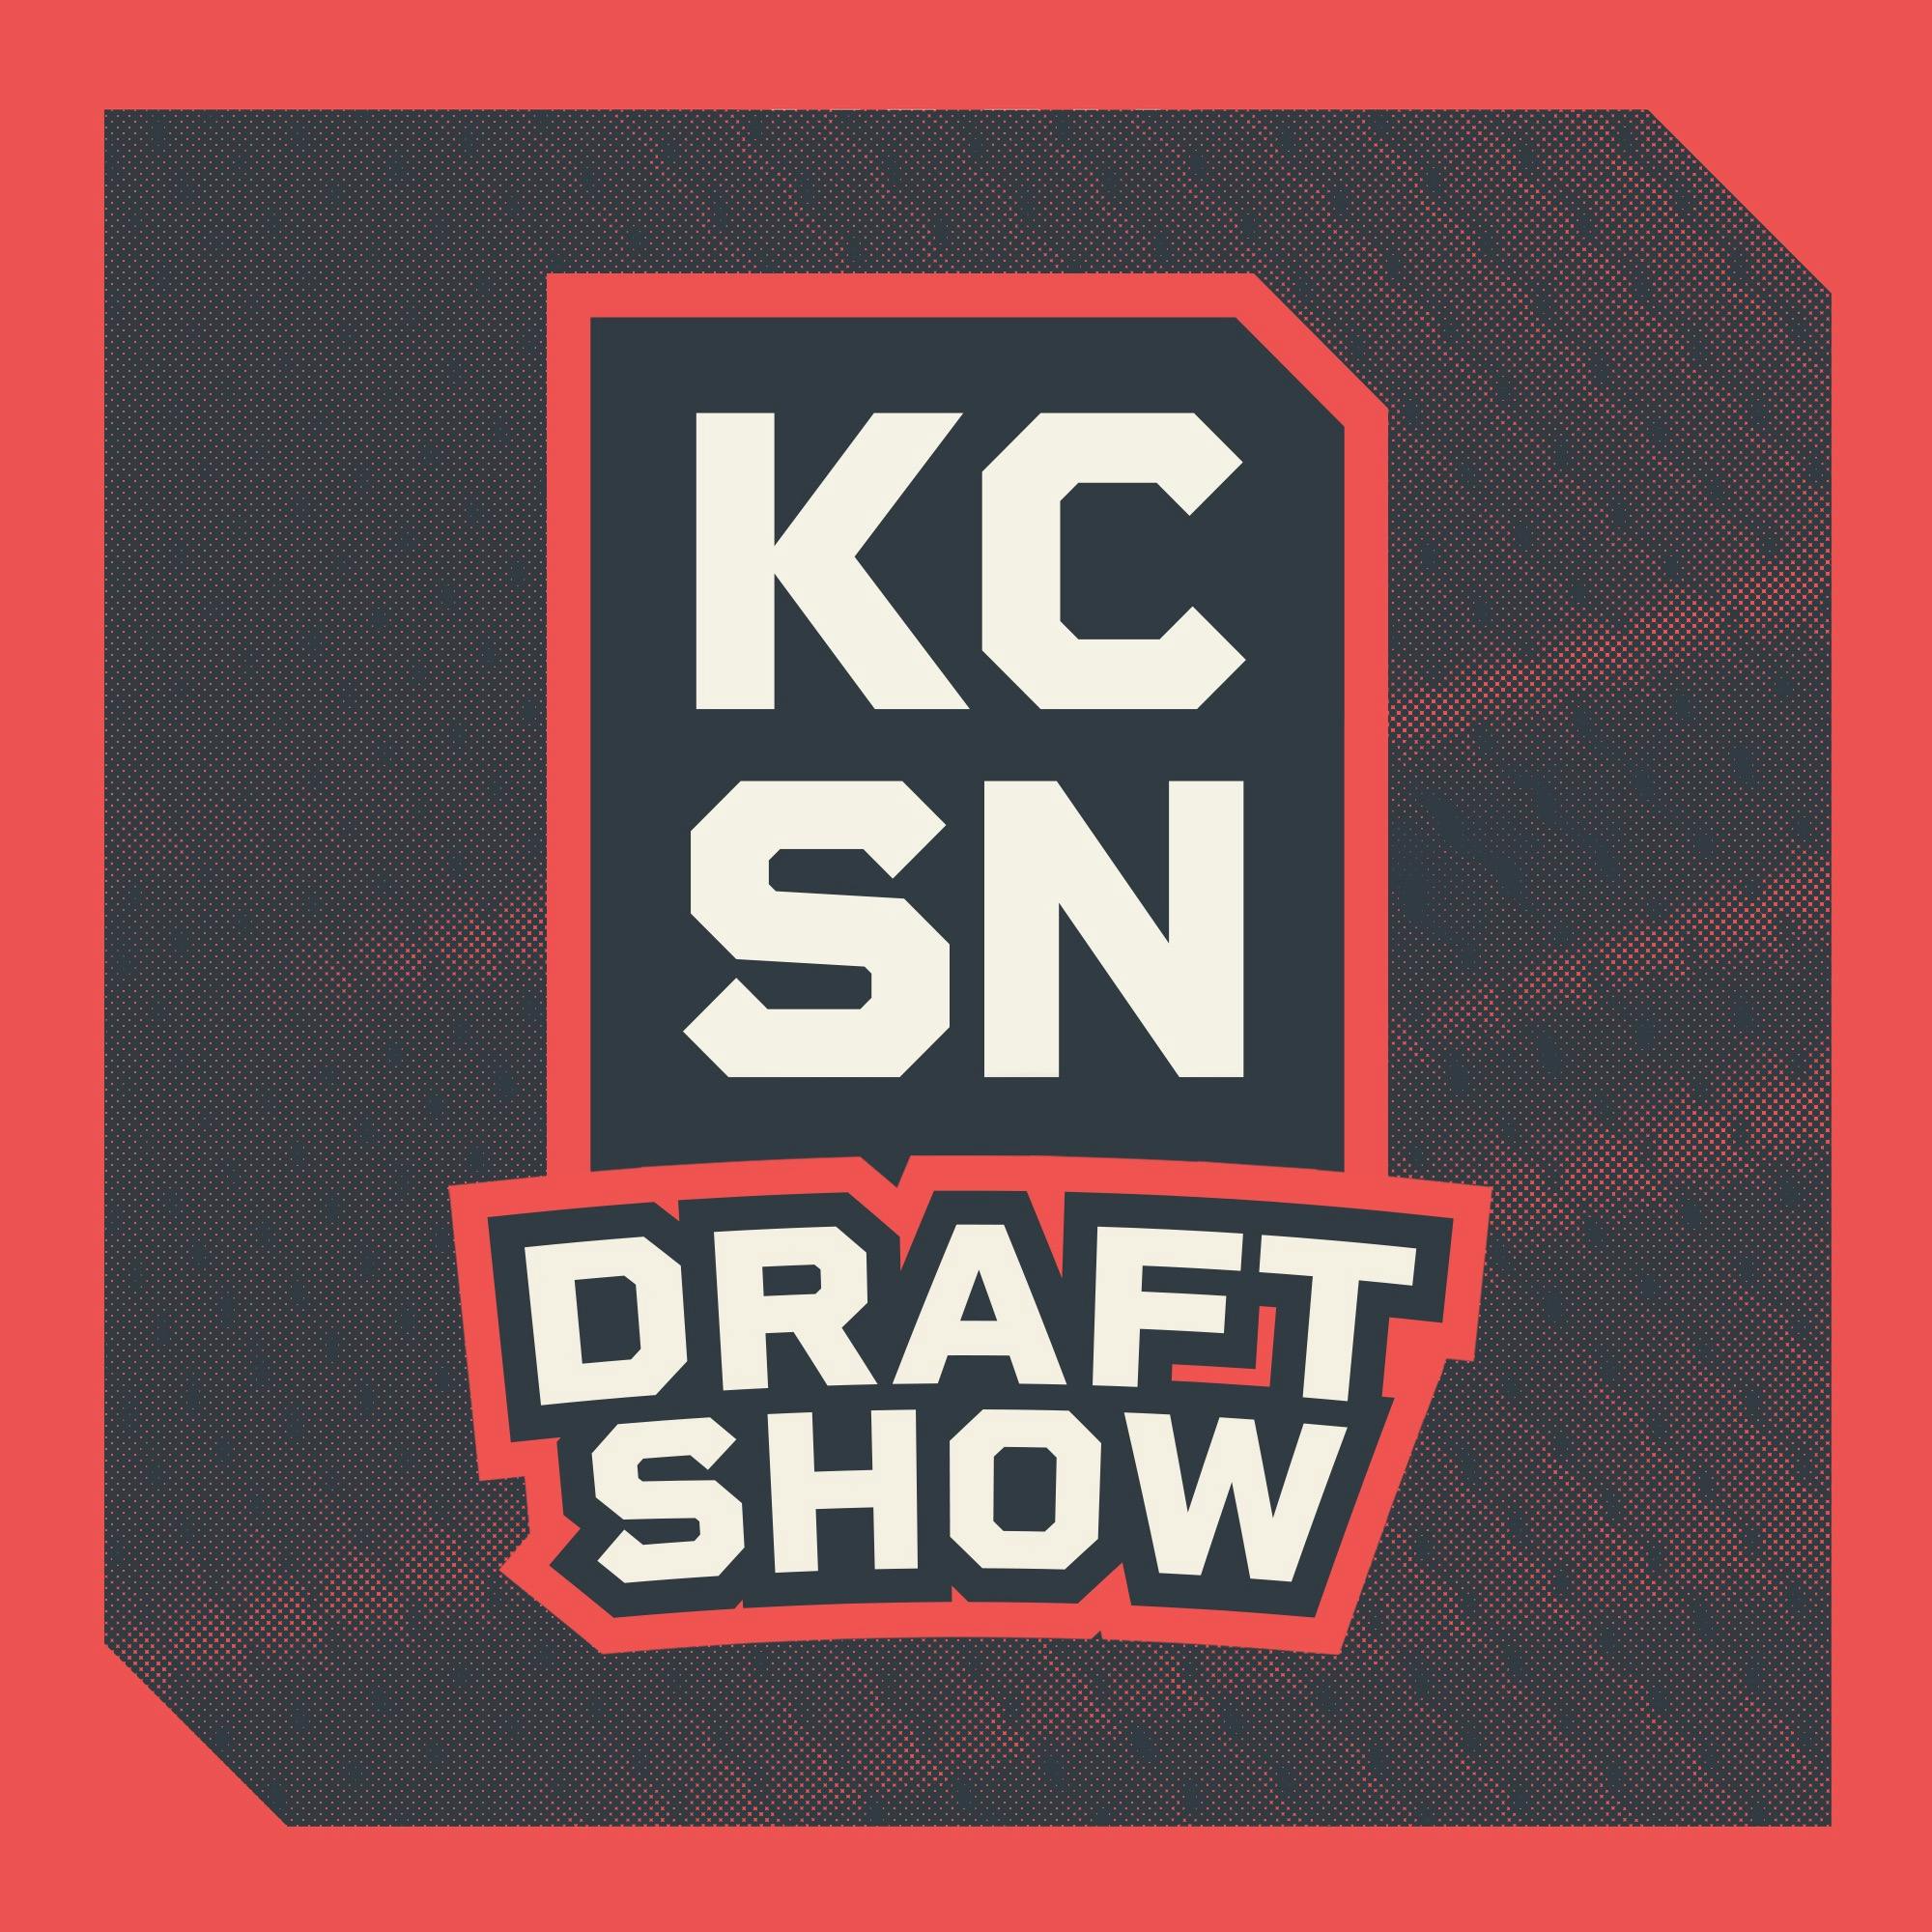 Exclusive 1-on-1 with Chiefs' 5th Round Pick, OL Hunter Nourzad from East-West Shrine Bowl | KCSN Draft Show 4/29